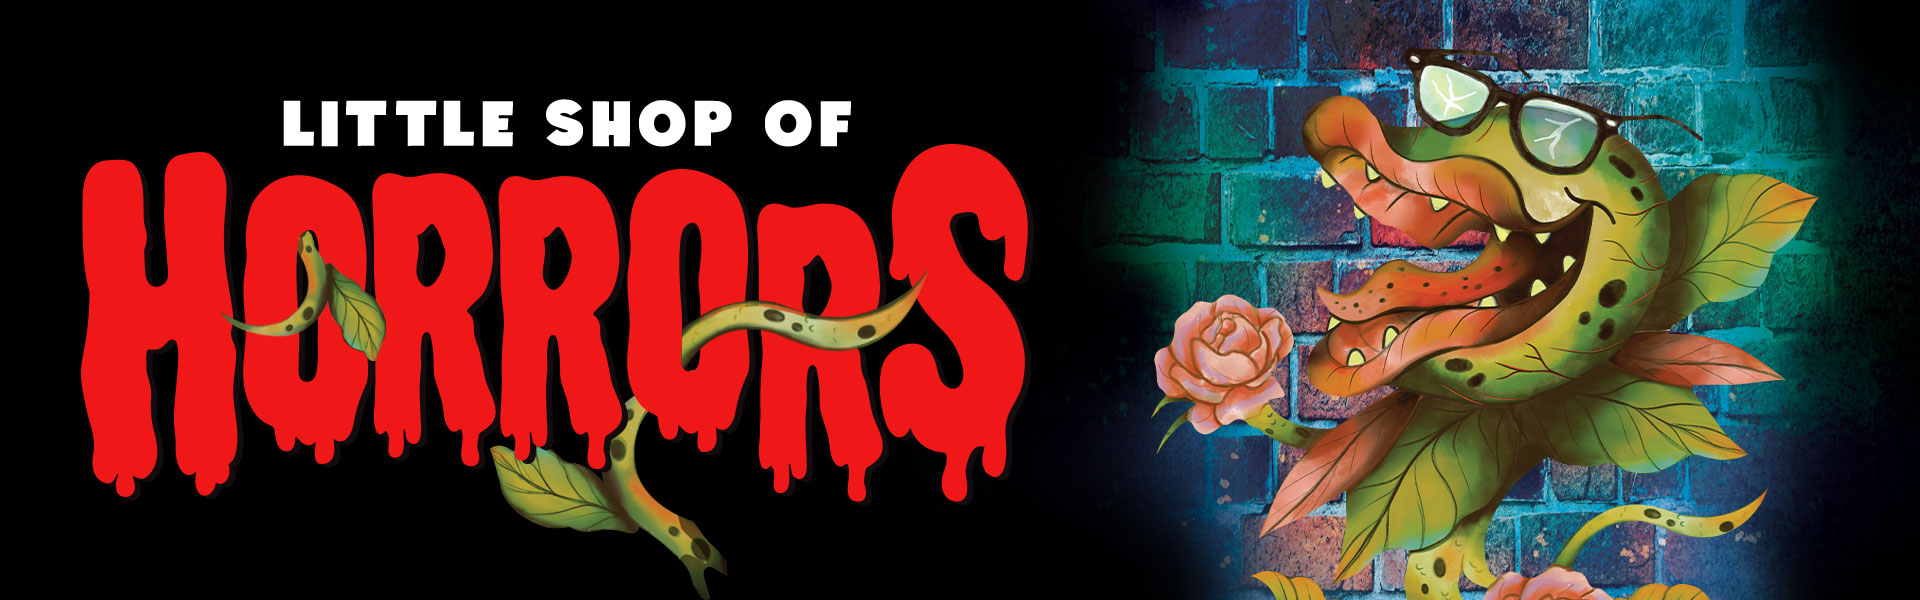 Copyright © 2015 Neptune Theatre Foundation | Musical Little Shop of Horrors